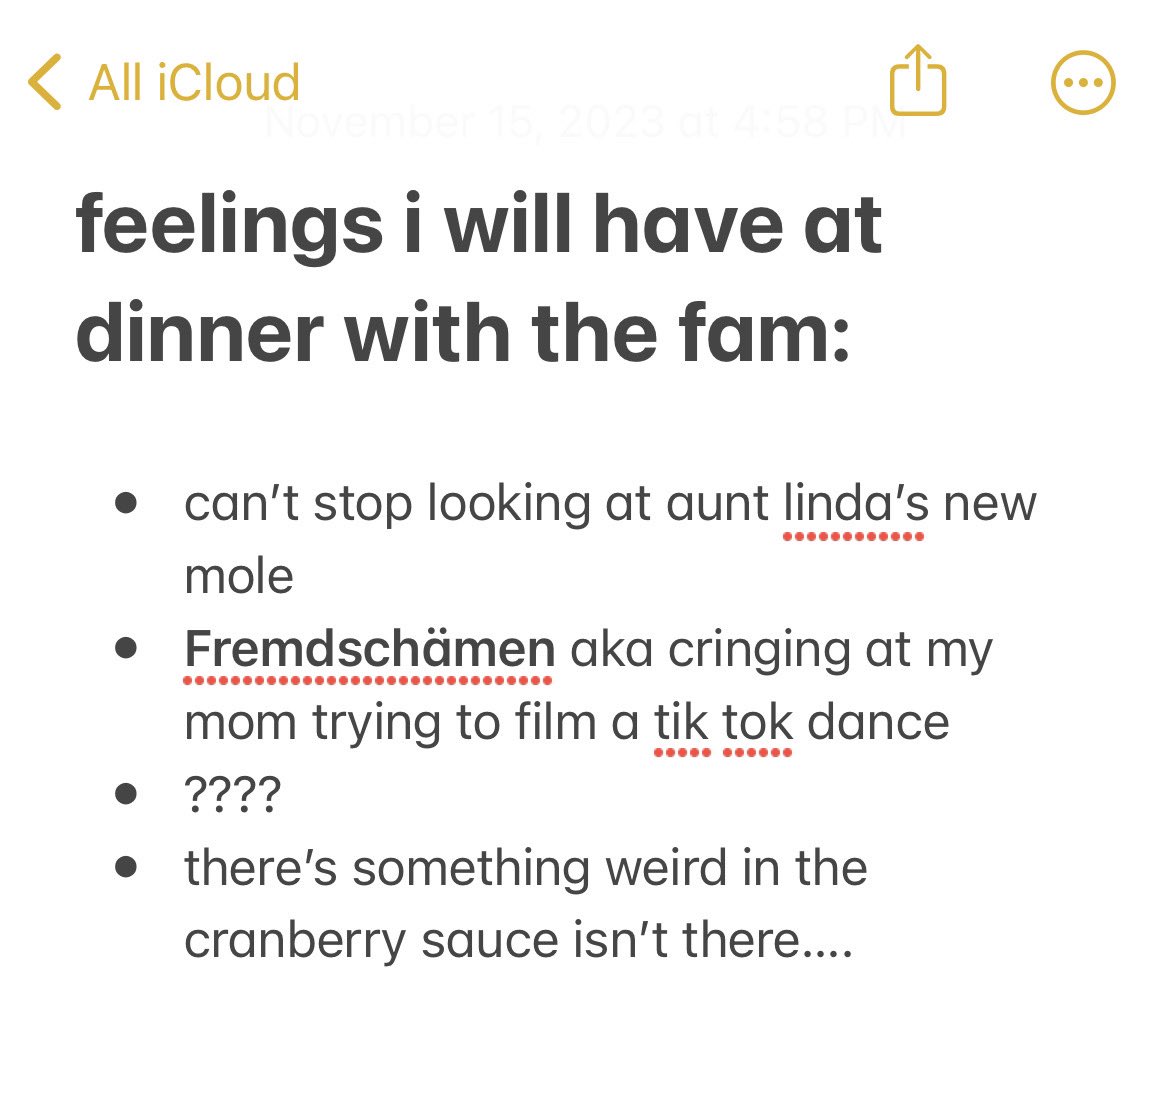 need a unique way to tell your aunts they’re being cringe? i gotchu blog.duolingo.com/untranslatable…